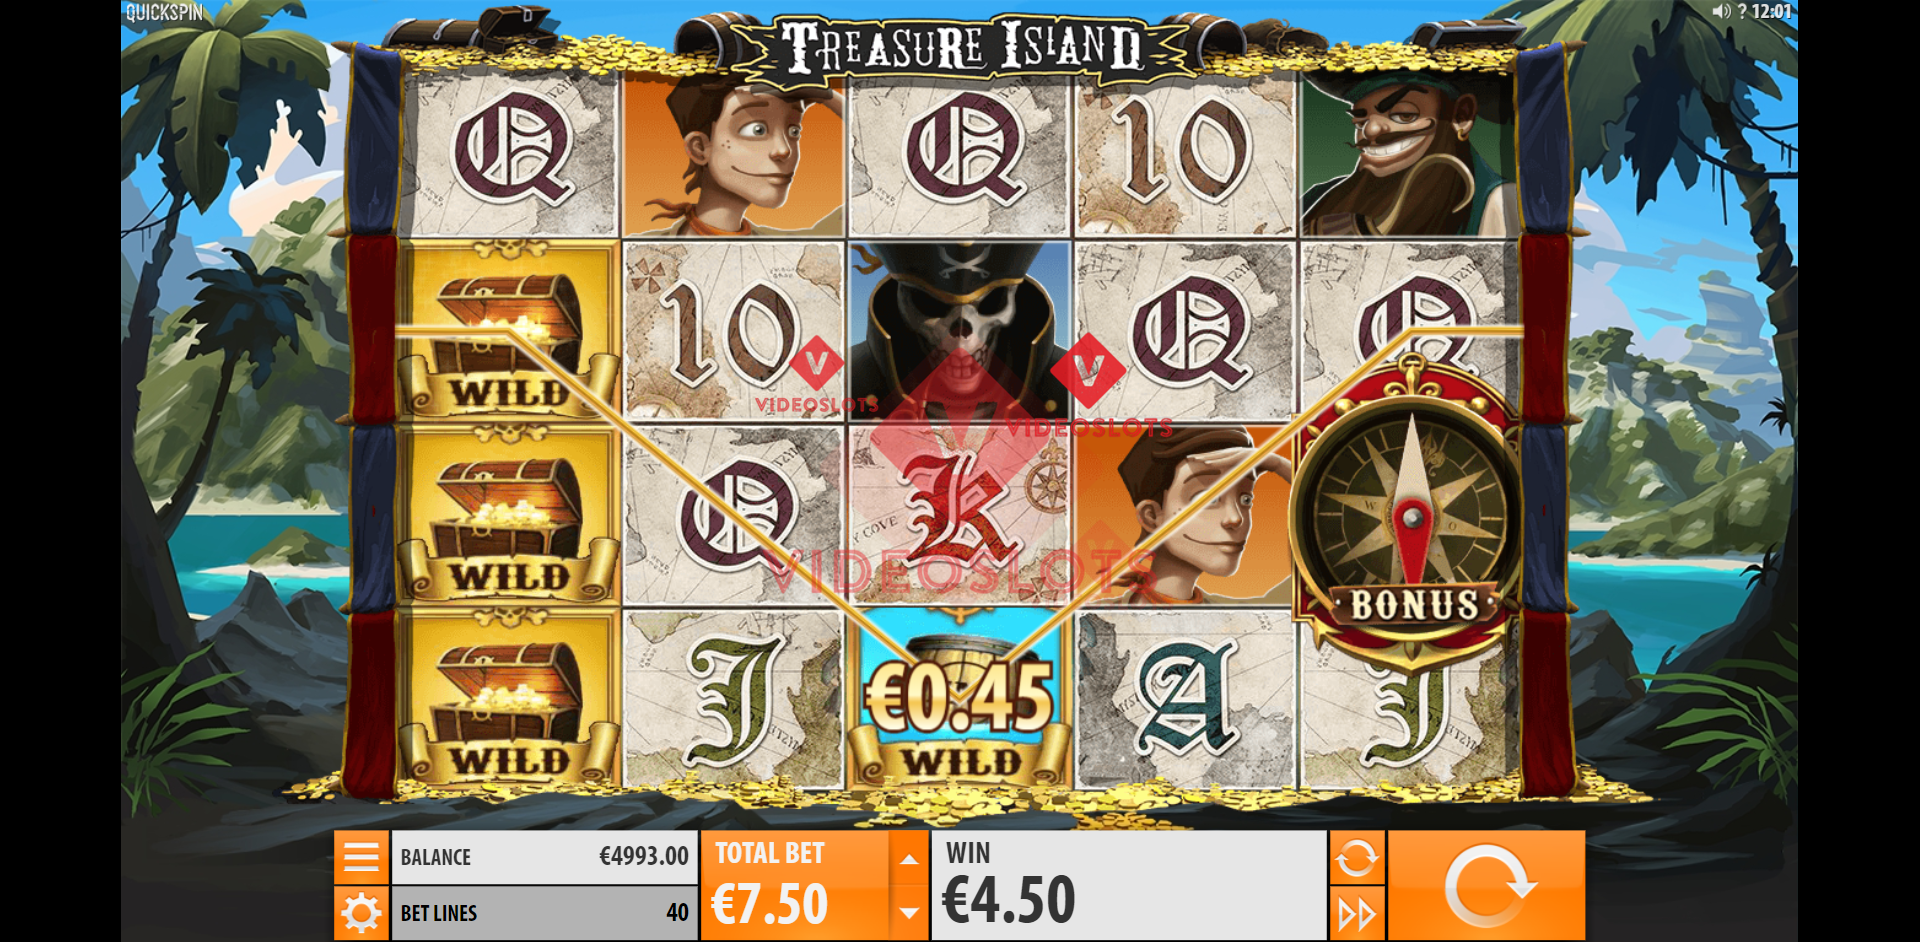 Base Game for Treasure Island slot from Quickspin